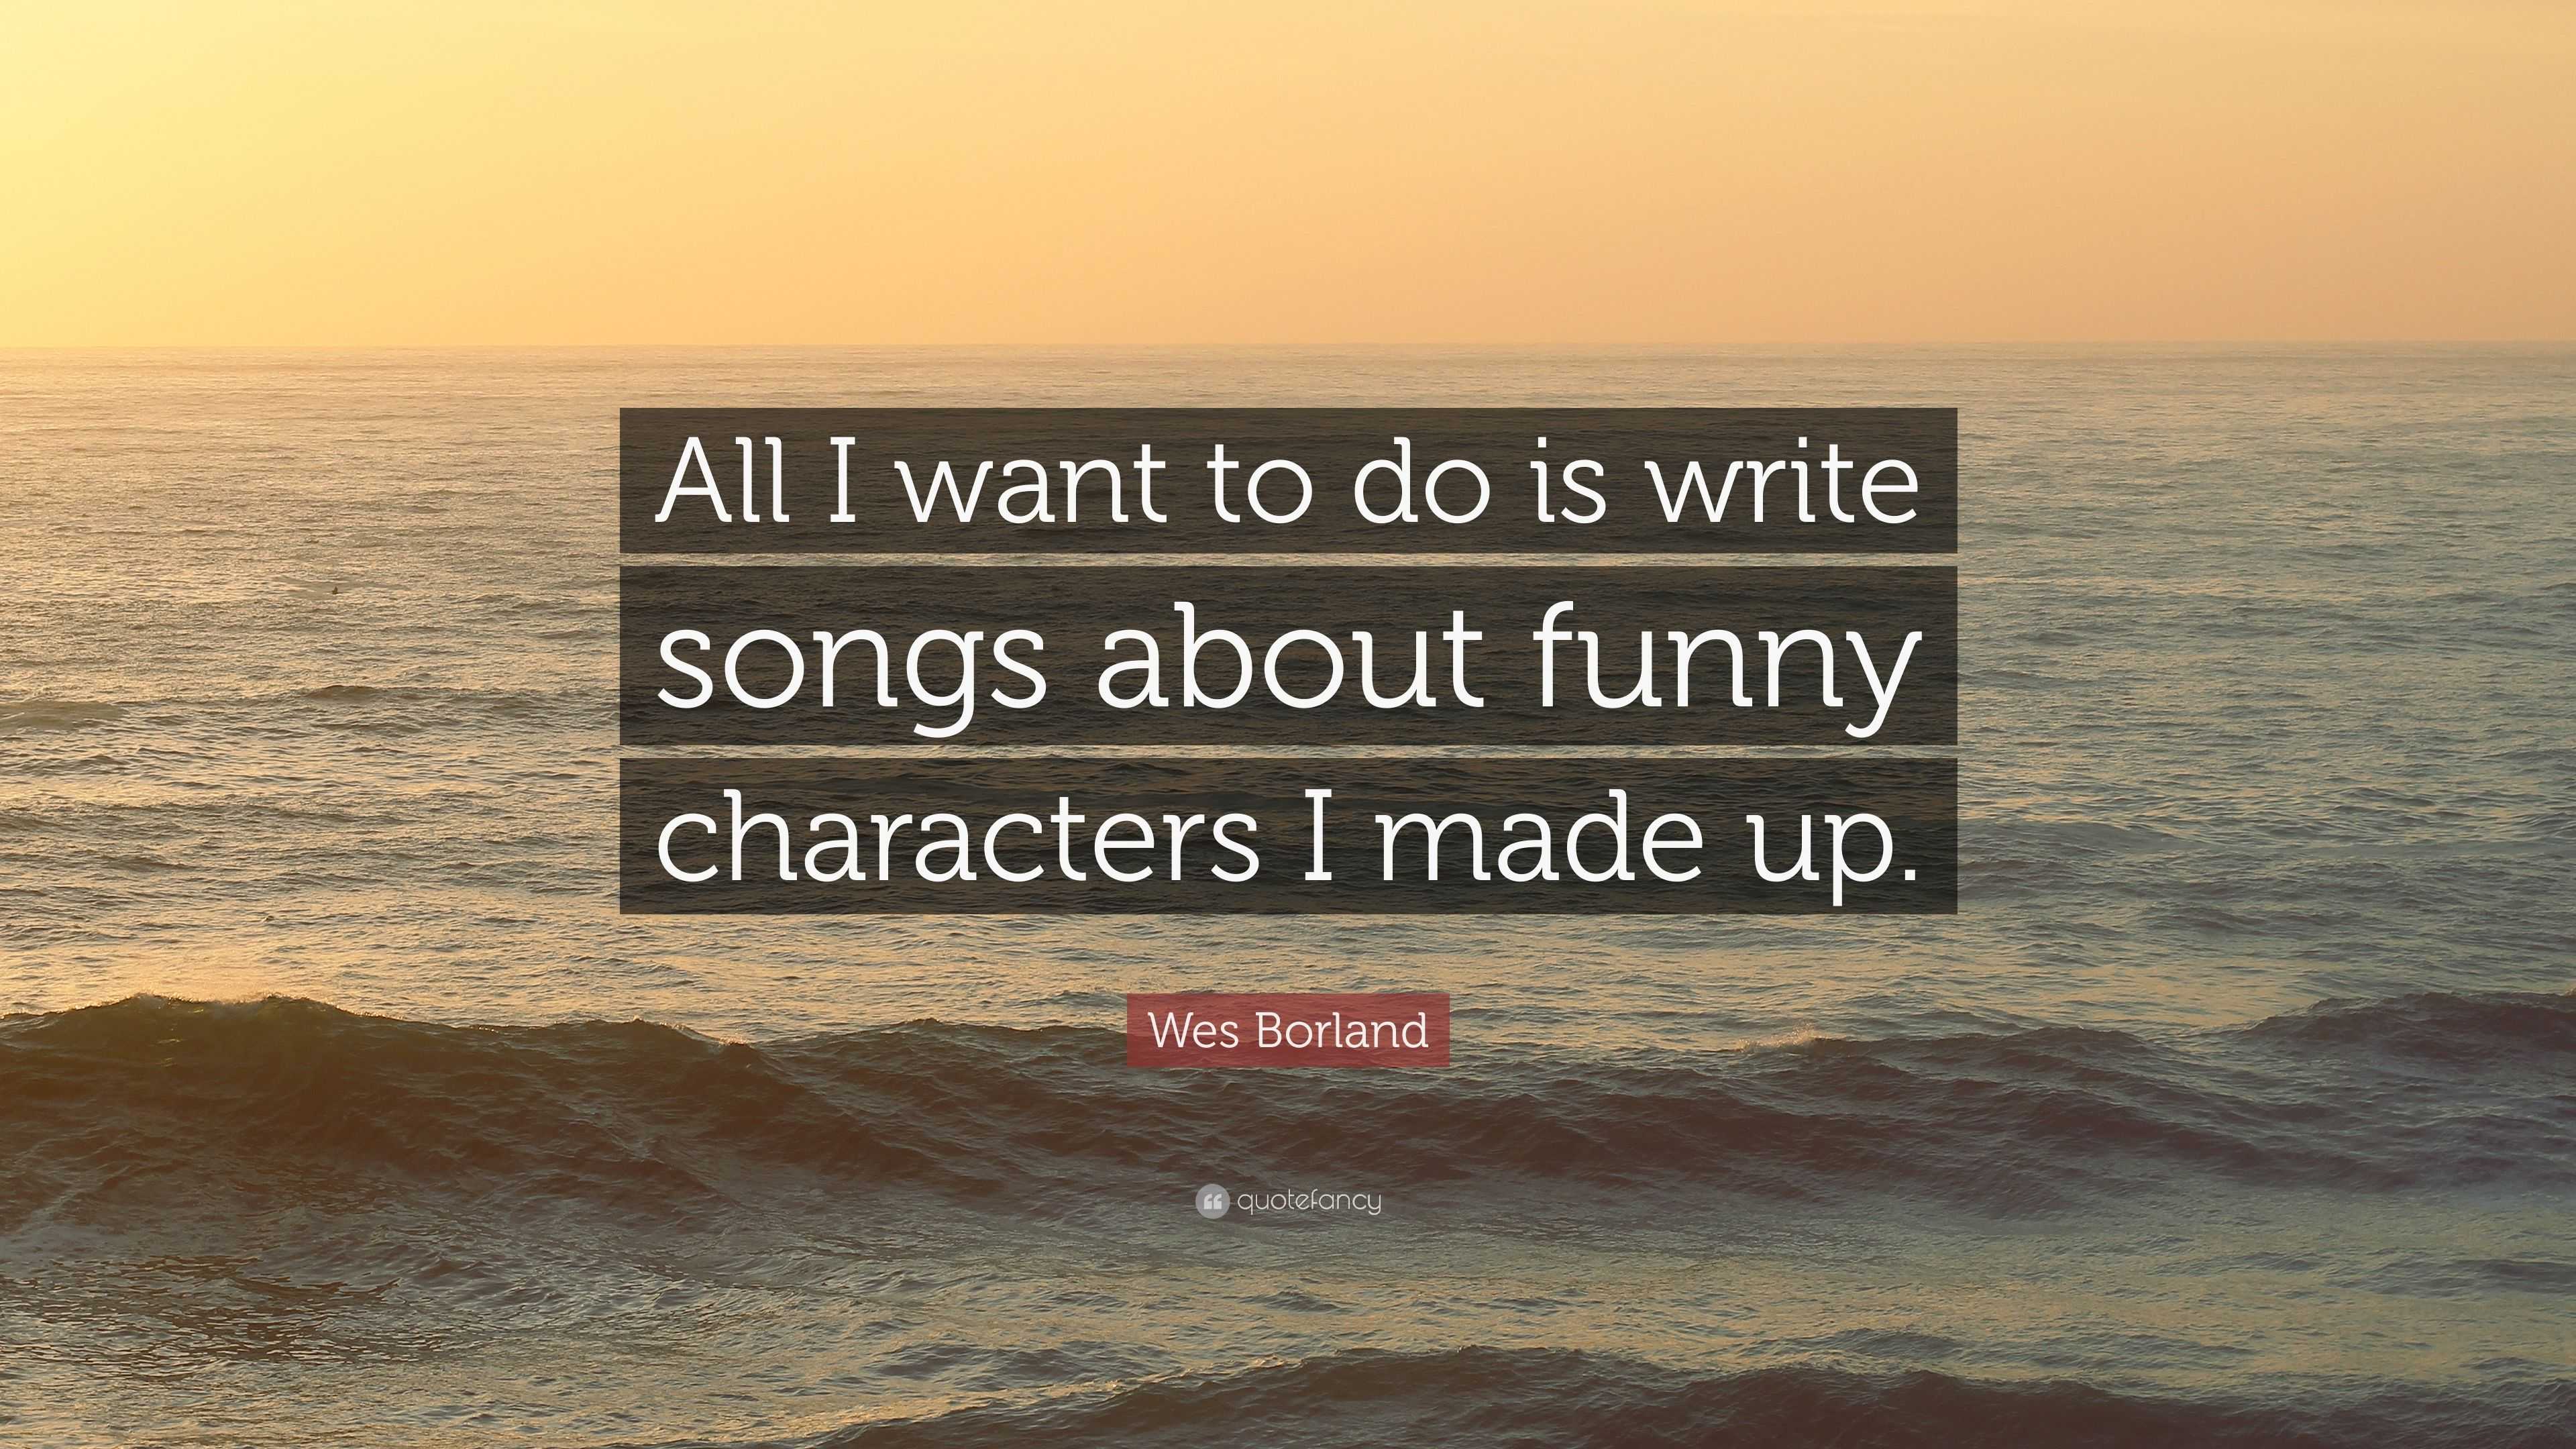 Wes Borland Quote: “All I want to do is write songs about funny characters  I made